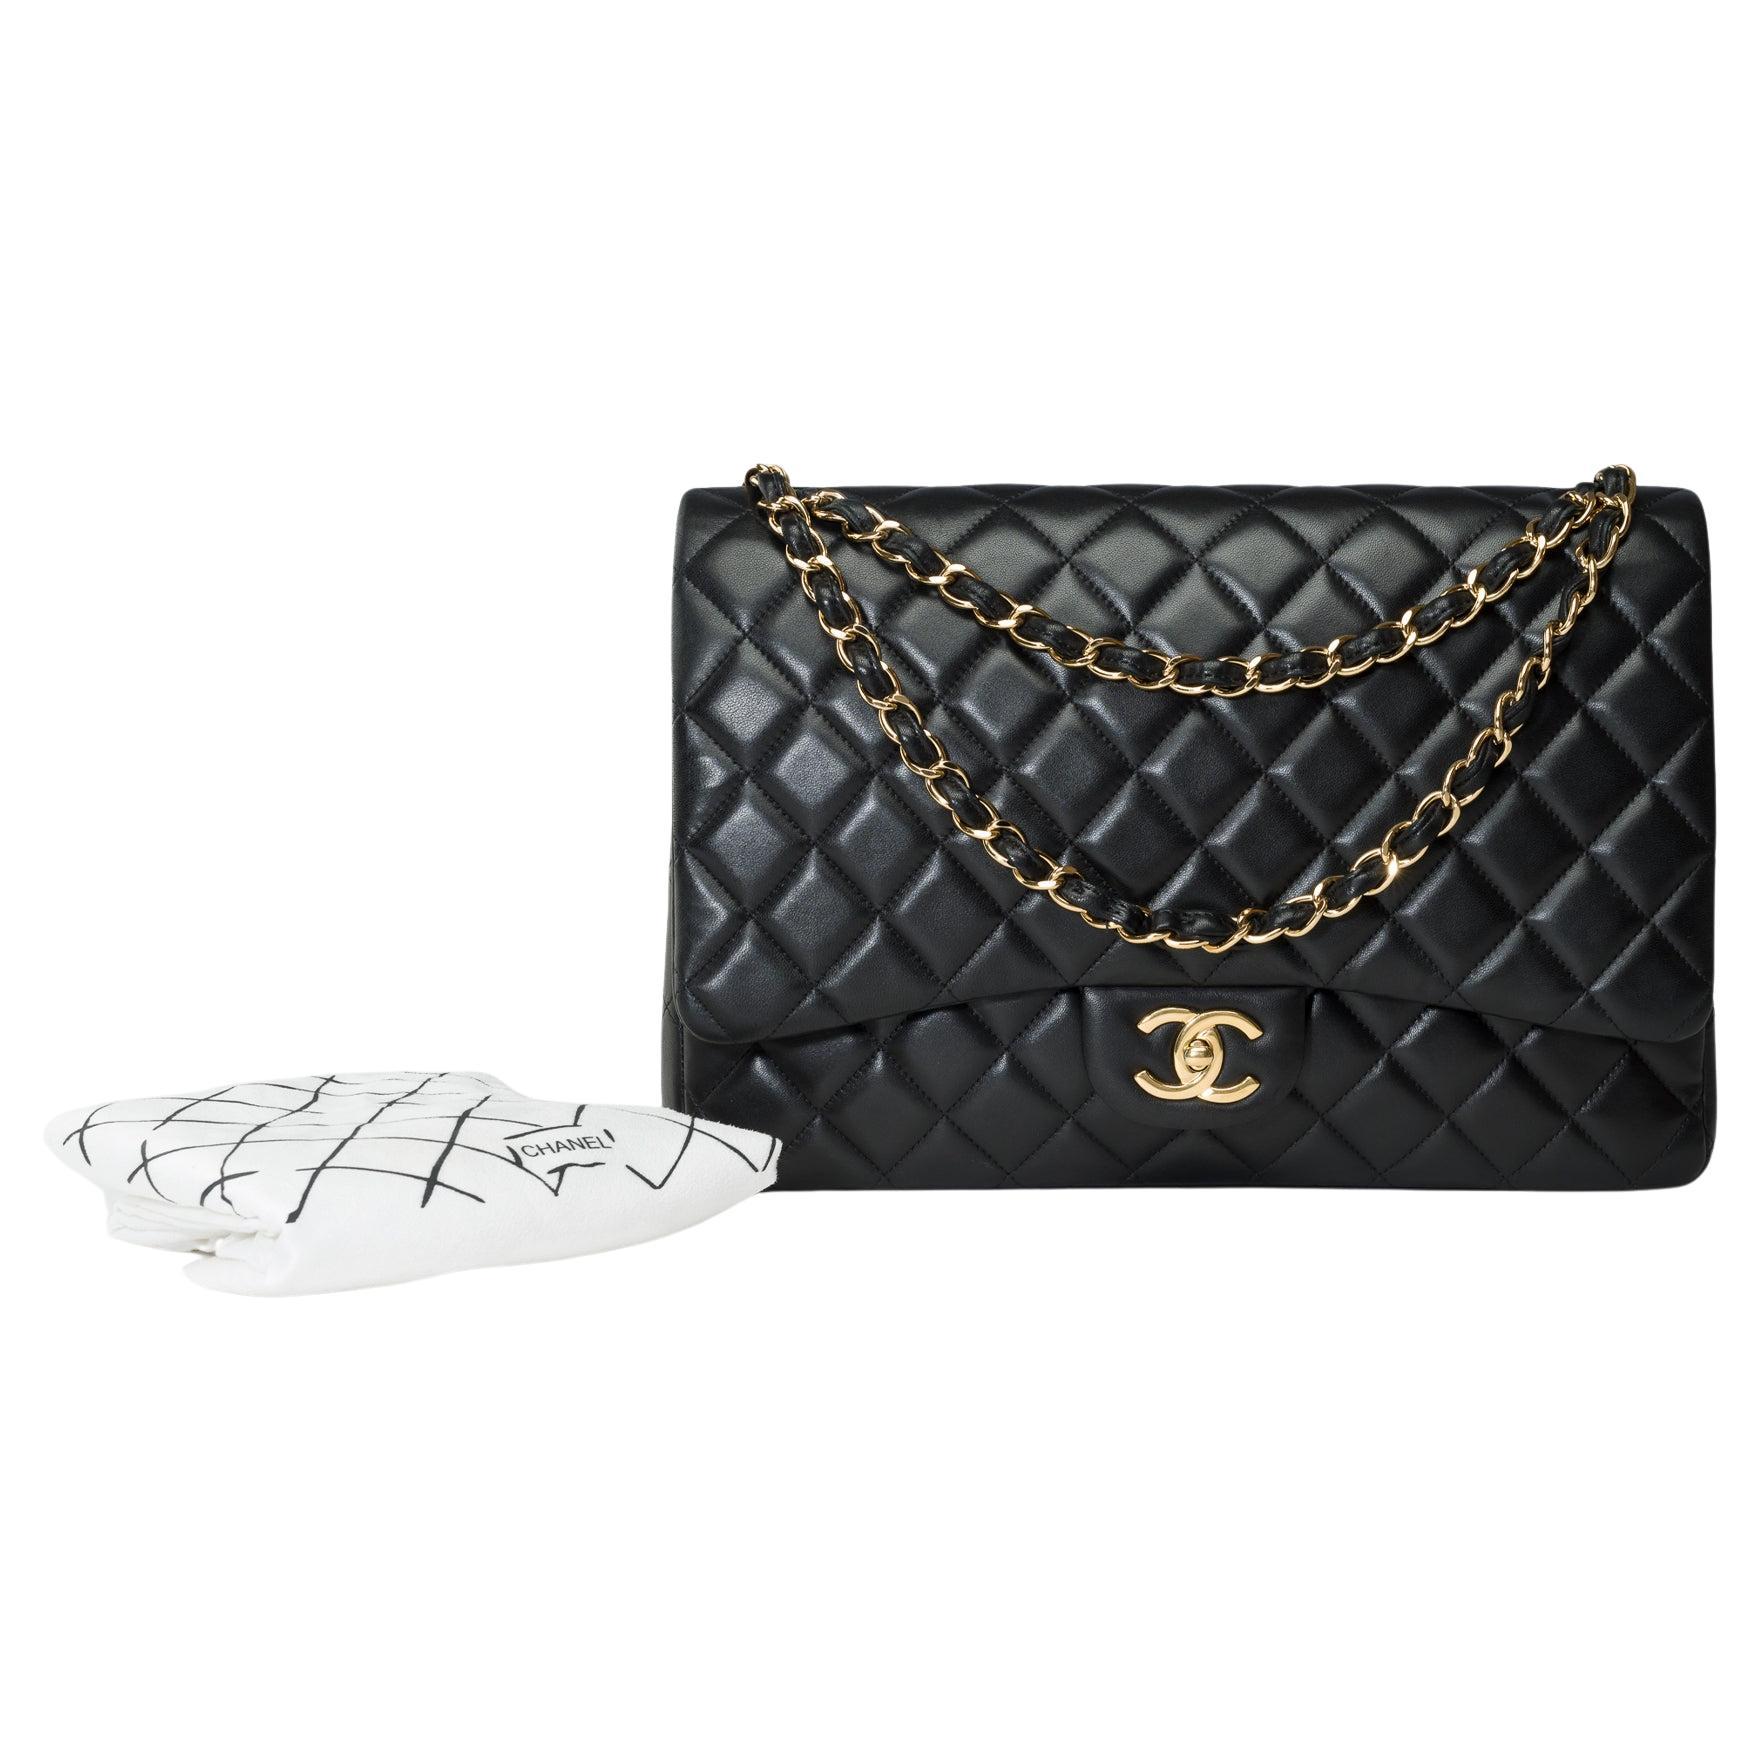 Chanel Timeless Maxi Jumbo double flap shoulder bag in Black quilted lamb, GHW For Sale